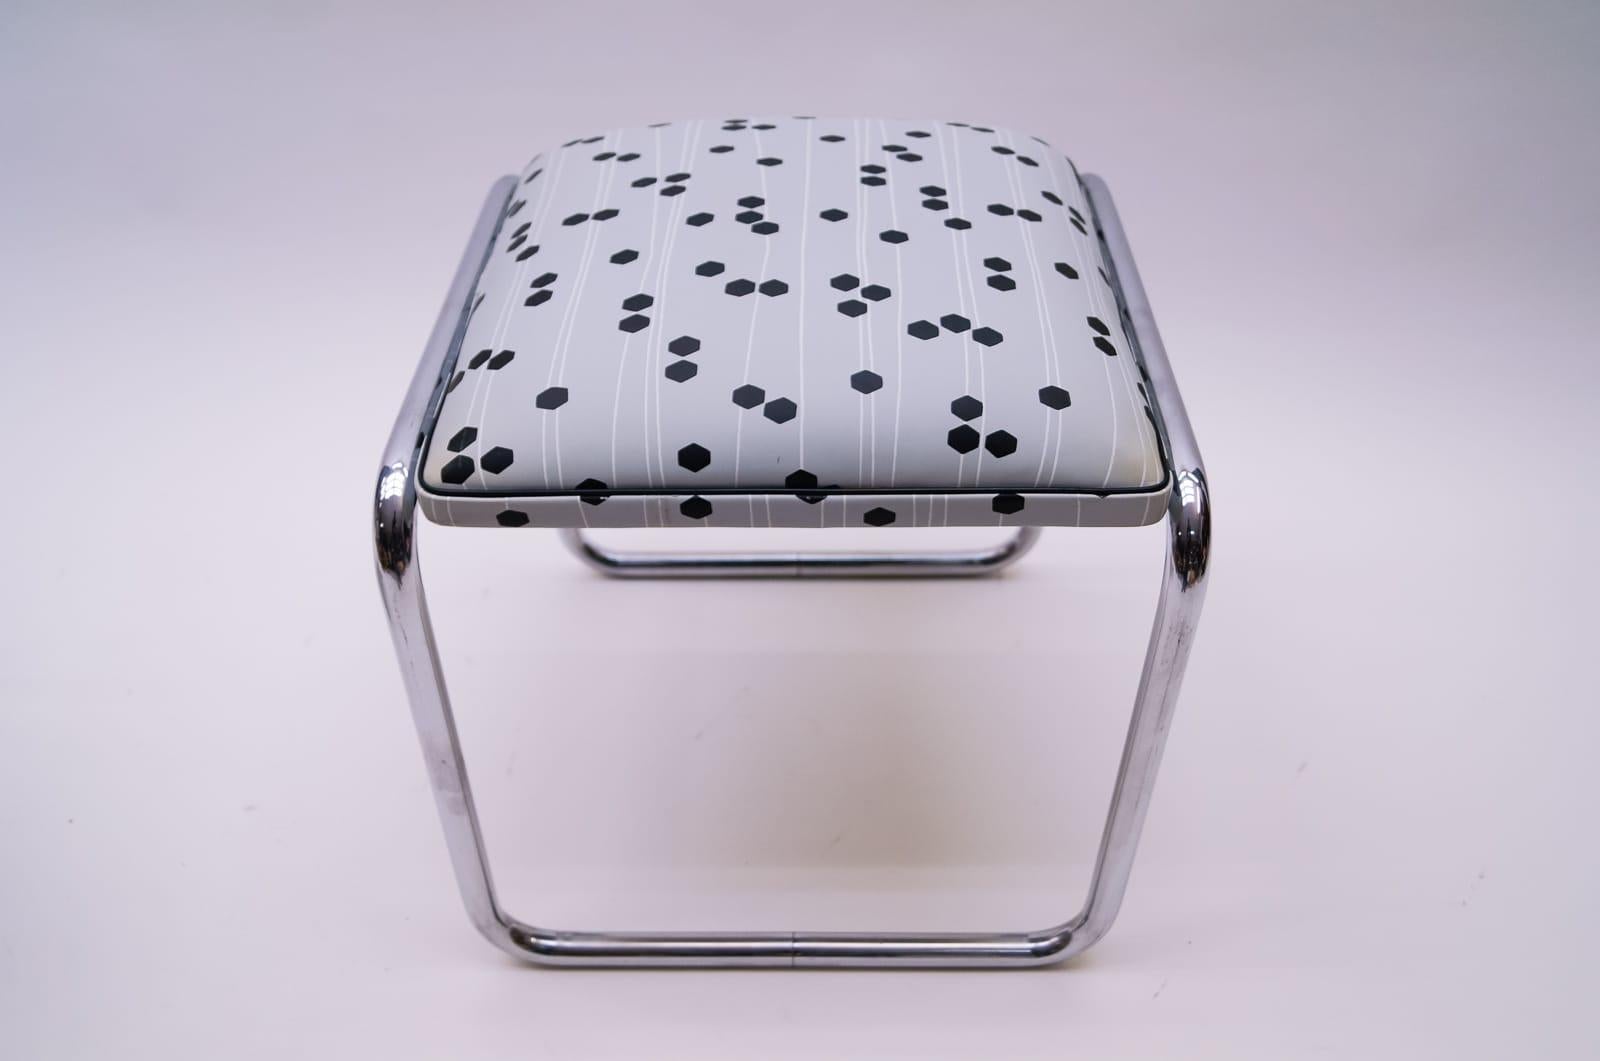 Pair of Tubular Steel Bauhaus Stools with Graphic Patterns, 1940s, Germany 3